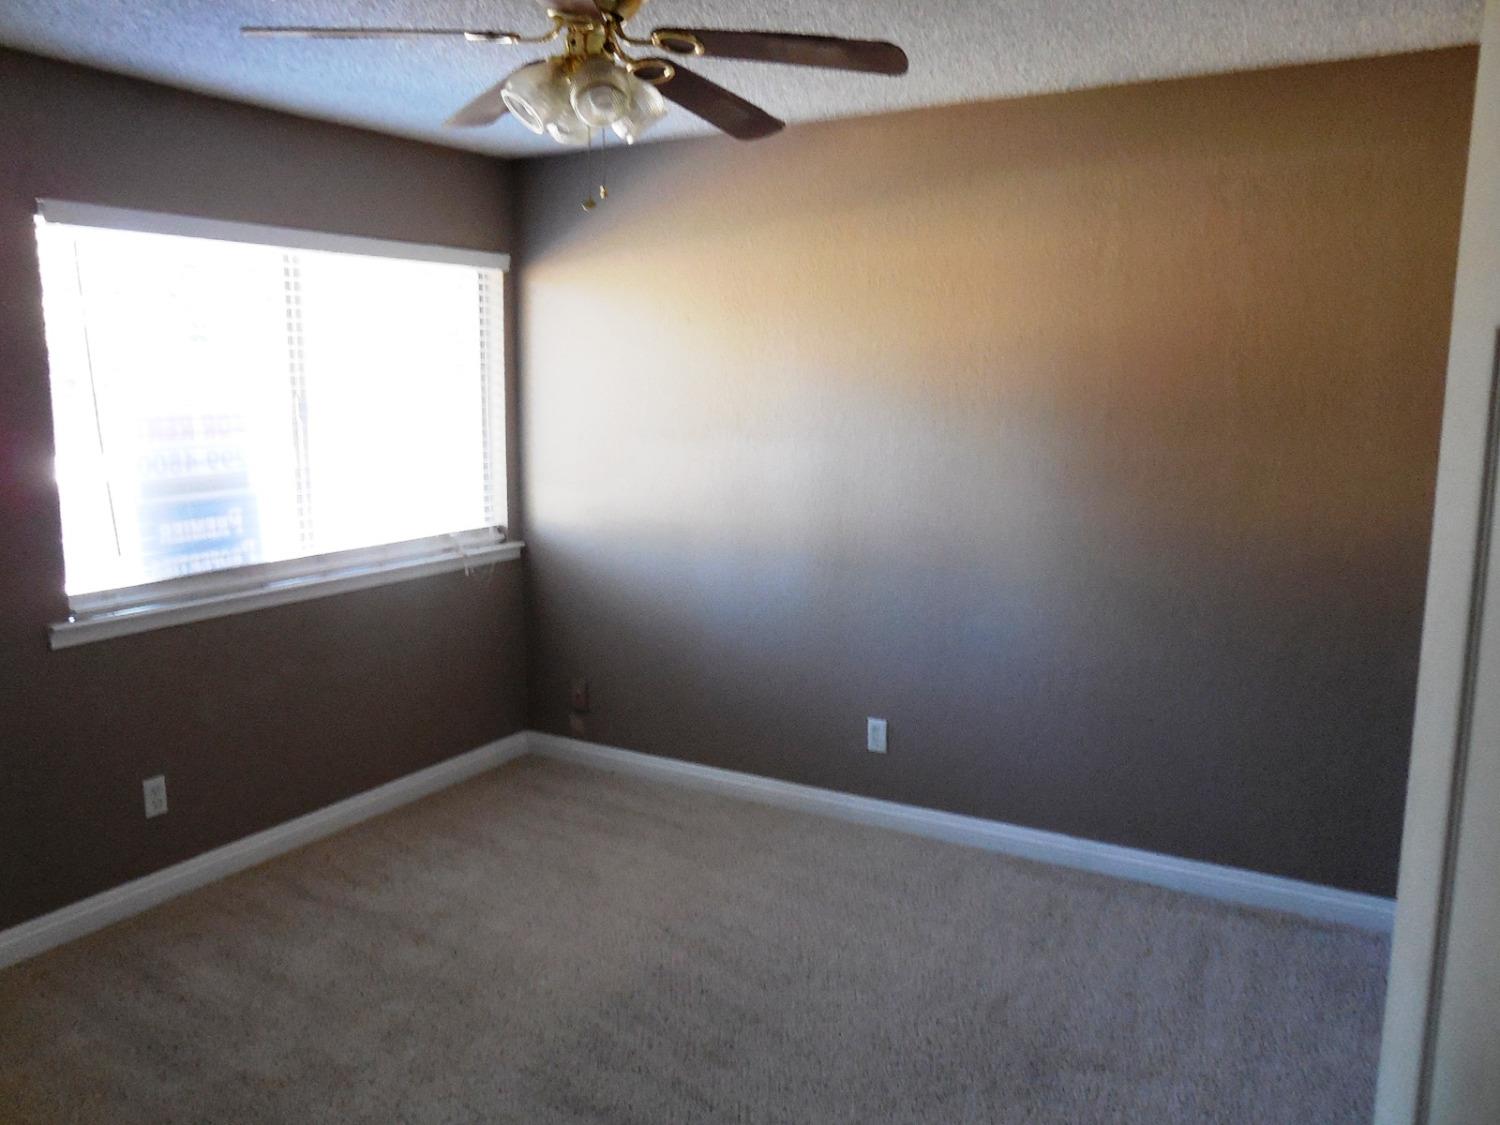 Great investment property! Near shopping, restaurants, and Fresno State University. Public transportation is also nearby. This unit is currently occupied with a renter. Pictures are from prior to tenants in 2016.